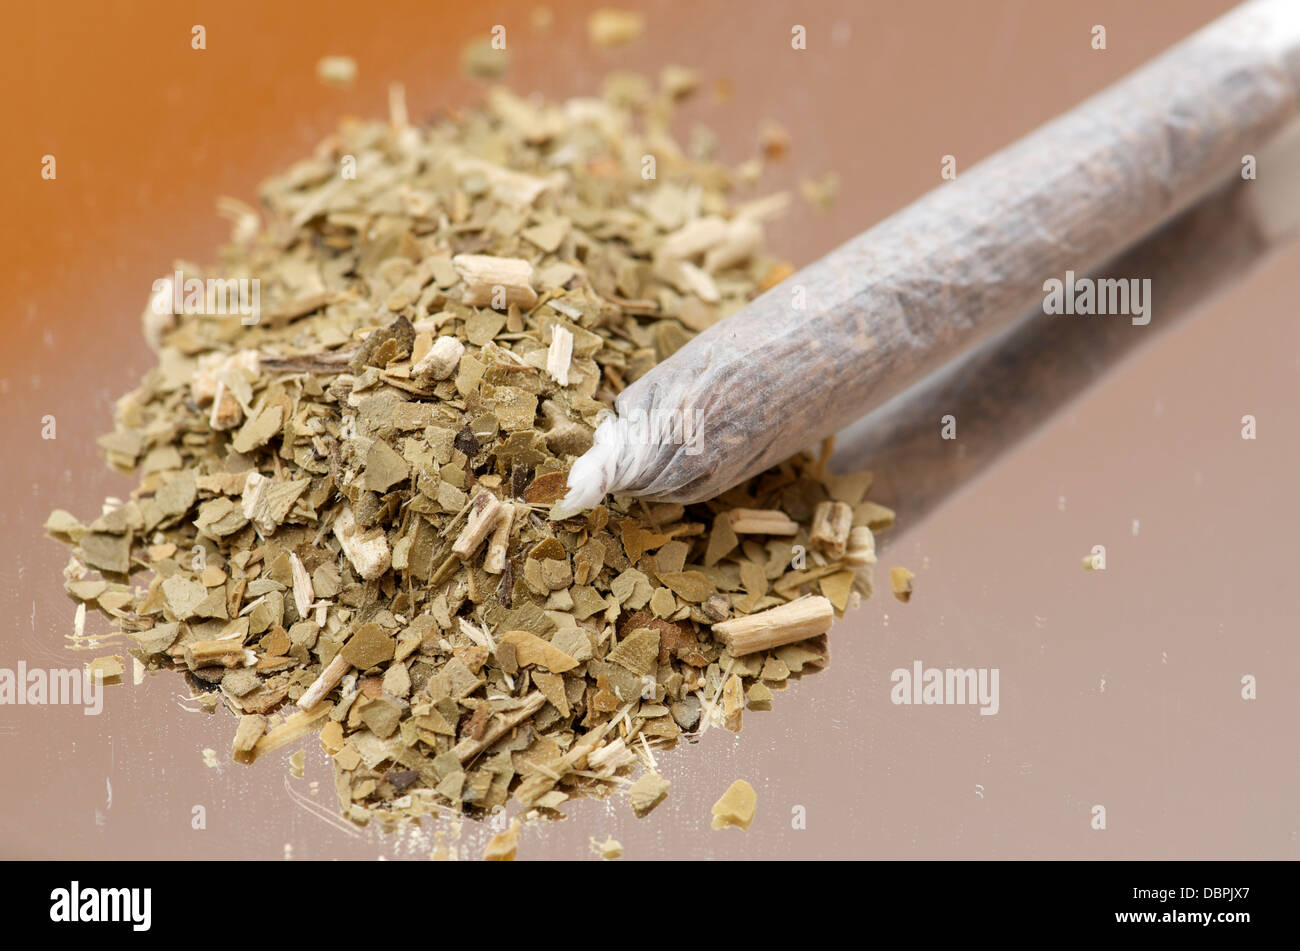 Cone marijuana joint, cannabis bud, weed in grinder. THC design Stock Photo  - Alamy